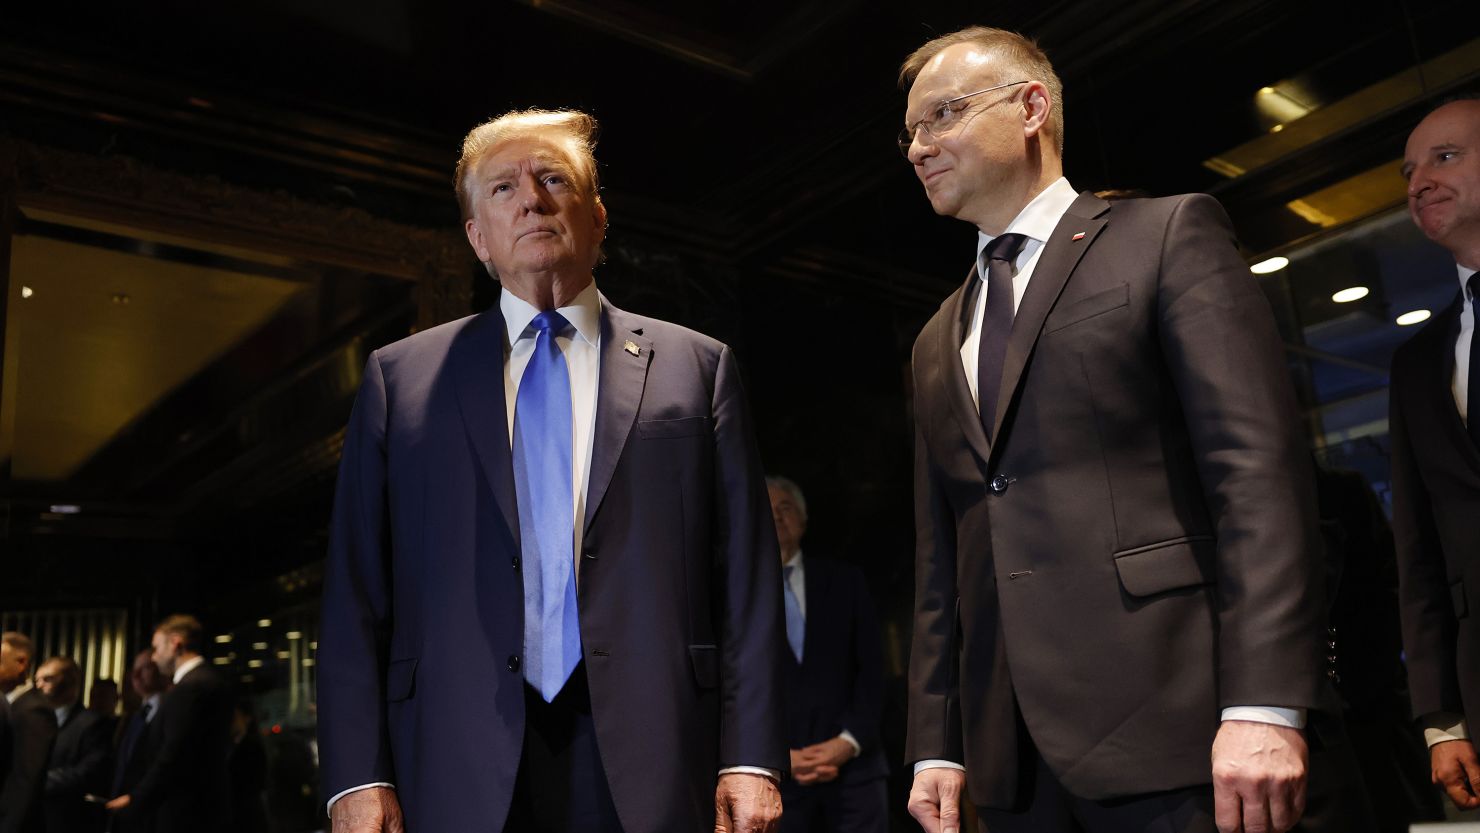 Former President Donald Trump stands with Polish President Andrzej Duda at Trump Tower on April 17, 2024 in New York City. Trump met with President Duda, a strong supporter of Ukraine, as European and NATO leaders prepare for the possibility that Trump wins the November presidential election and returns to the White House.